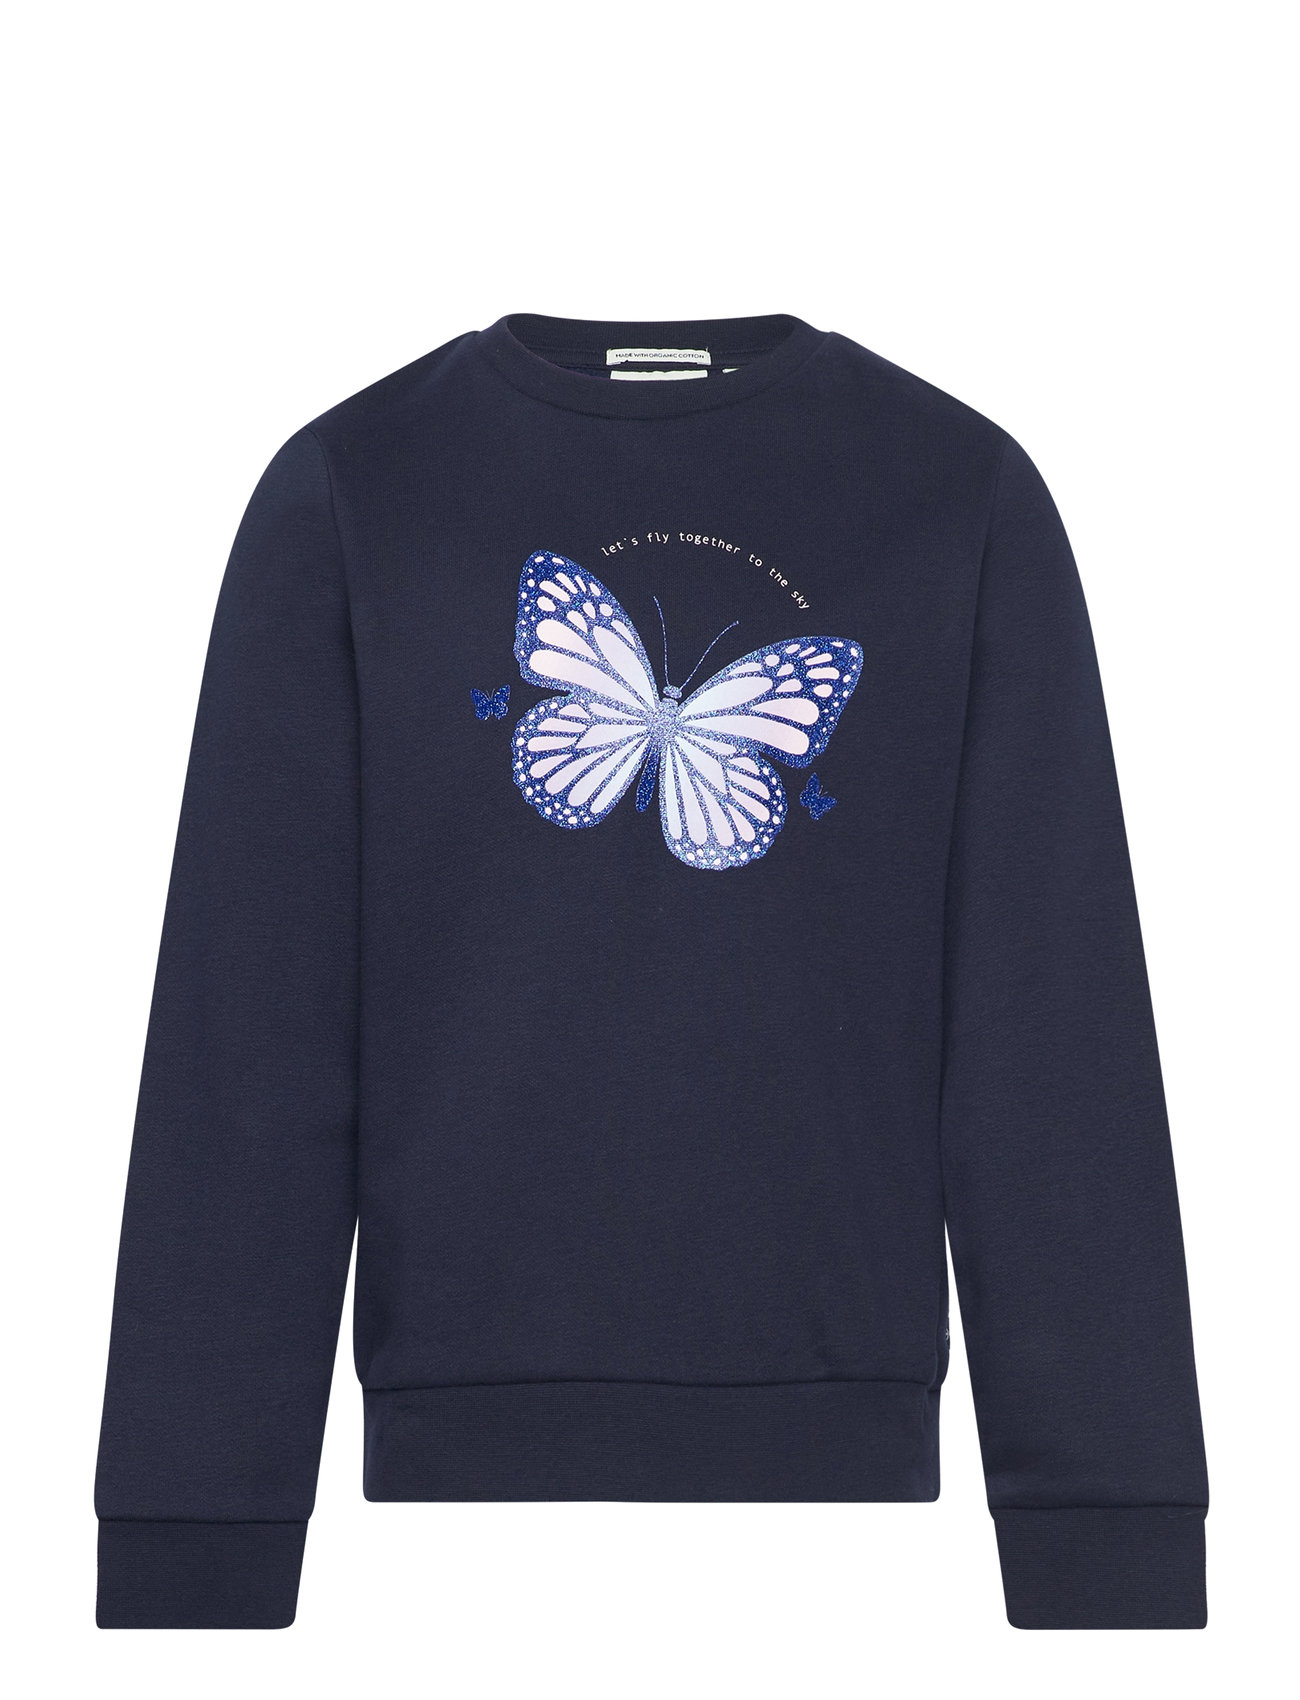 Tom Tailor Sweatshirt With Butterfly Print (Sky Captain Blue) – 18.71 € –